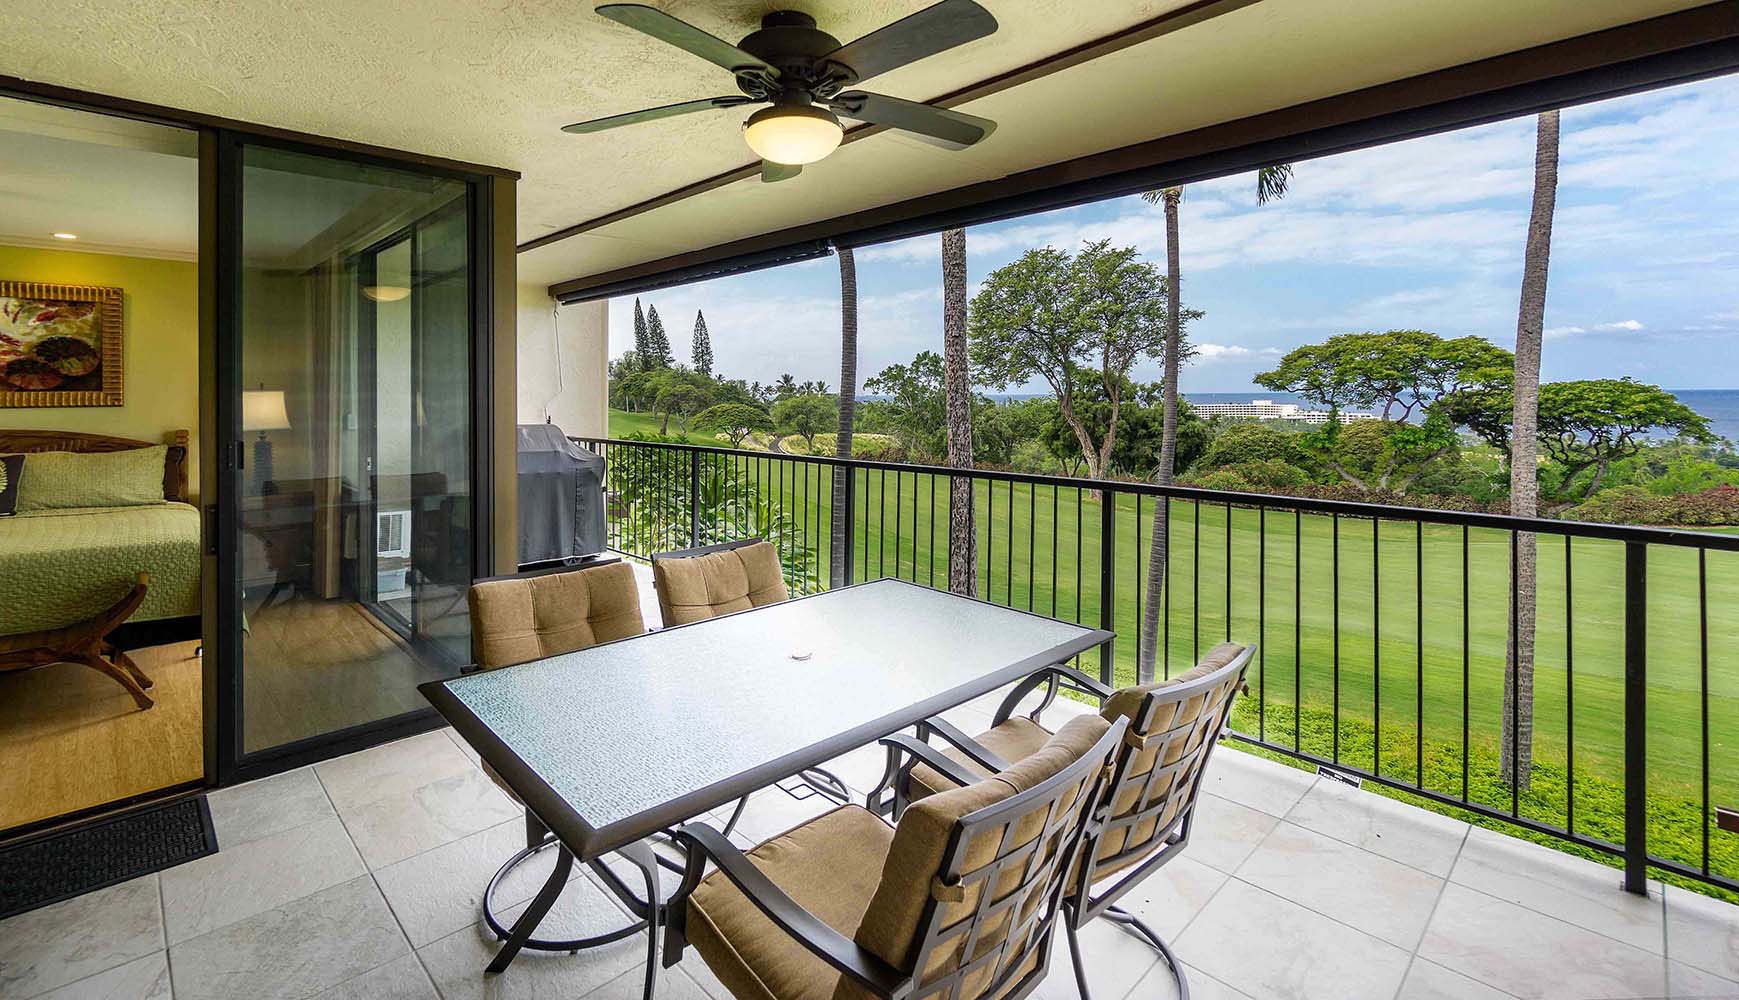 Enjoy BBQ's on your private lanai